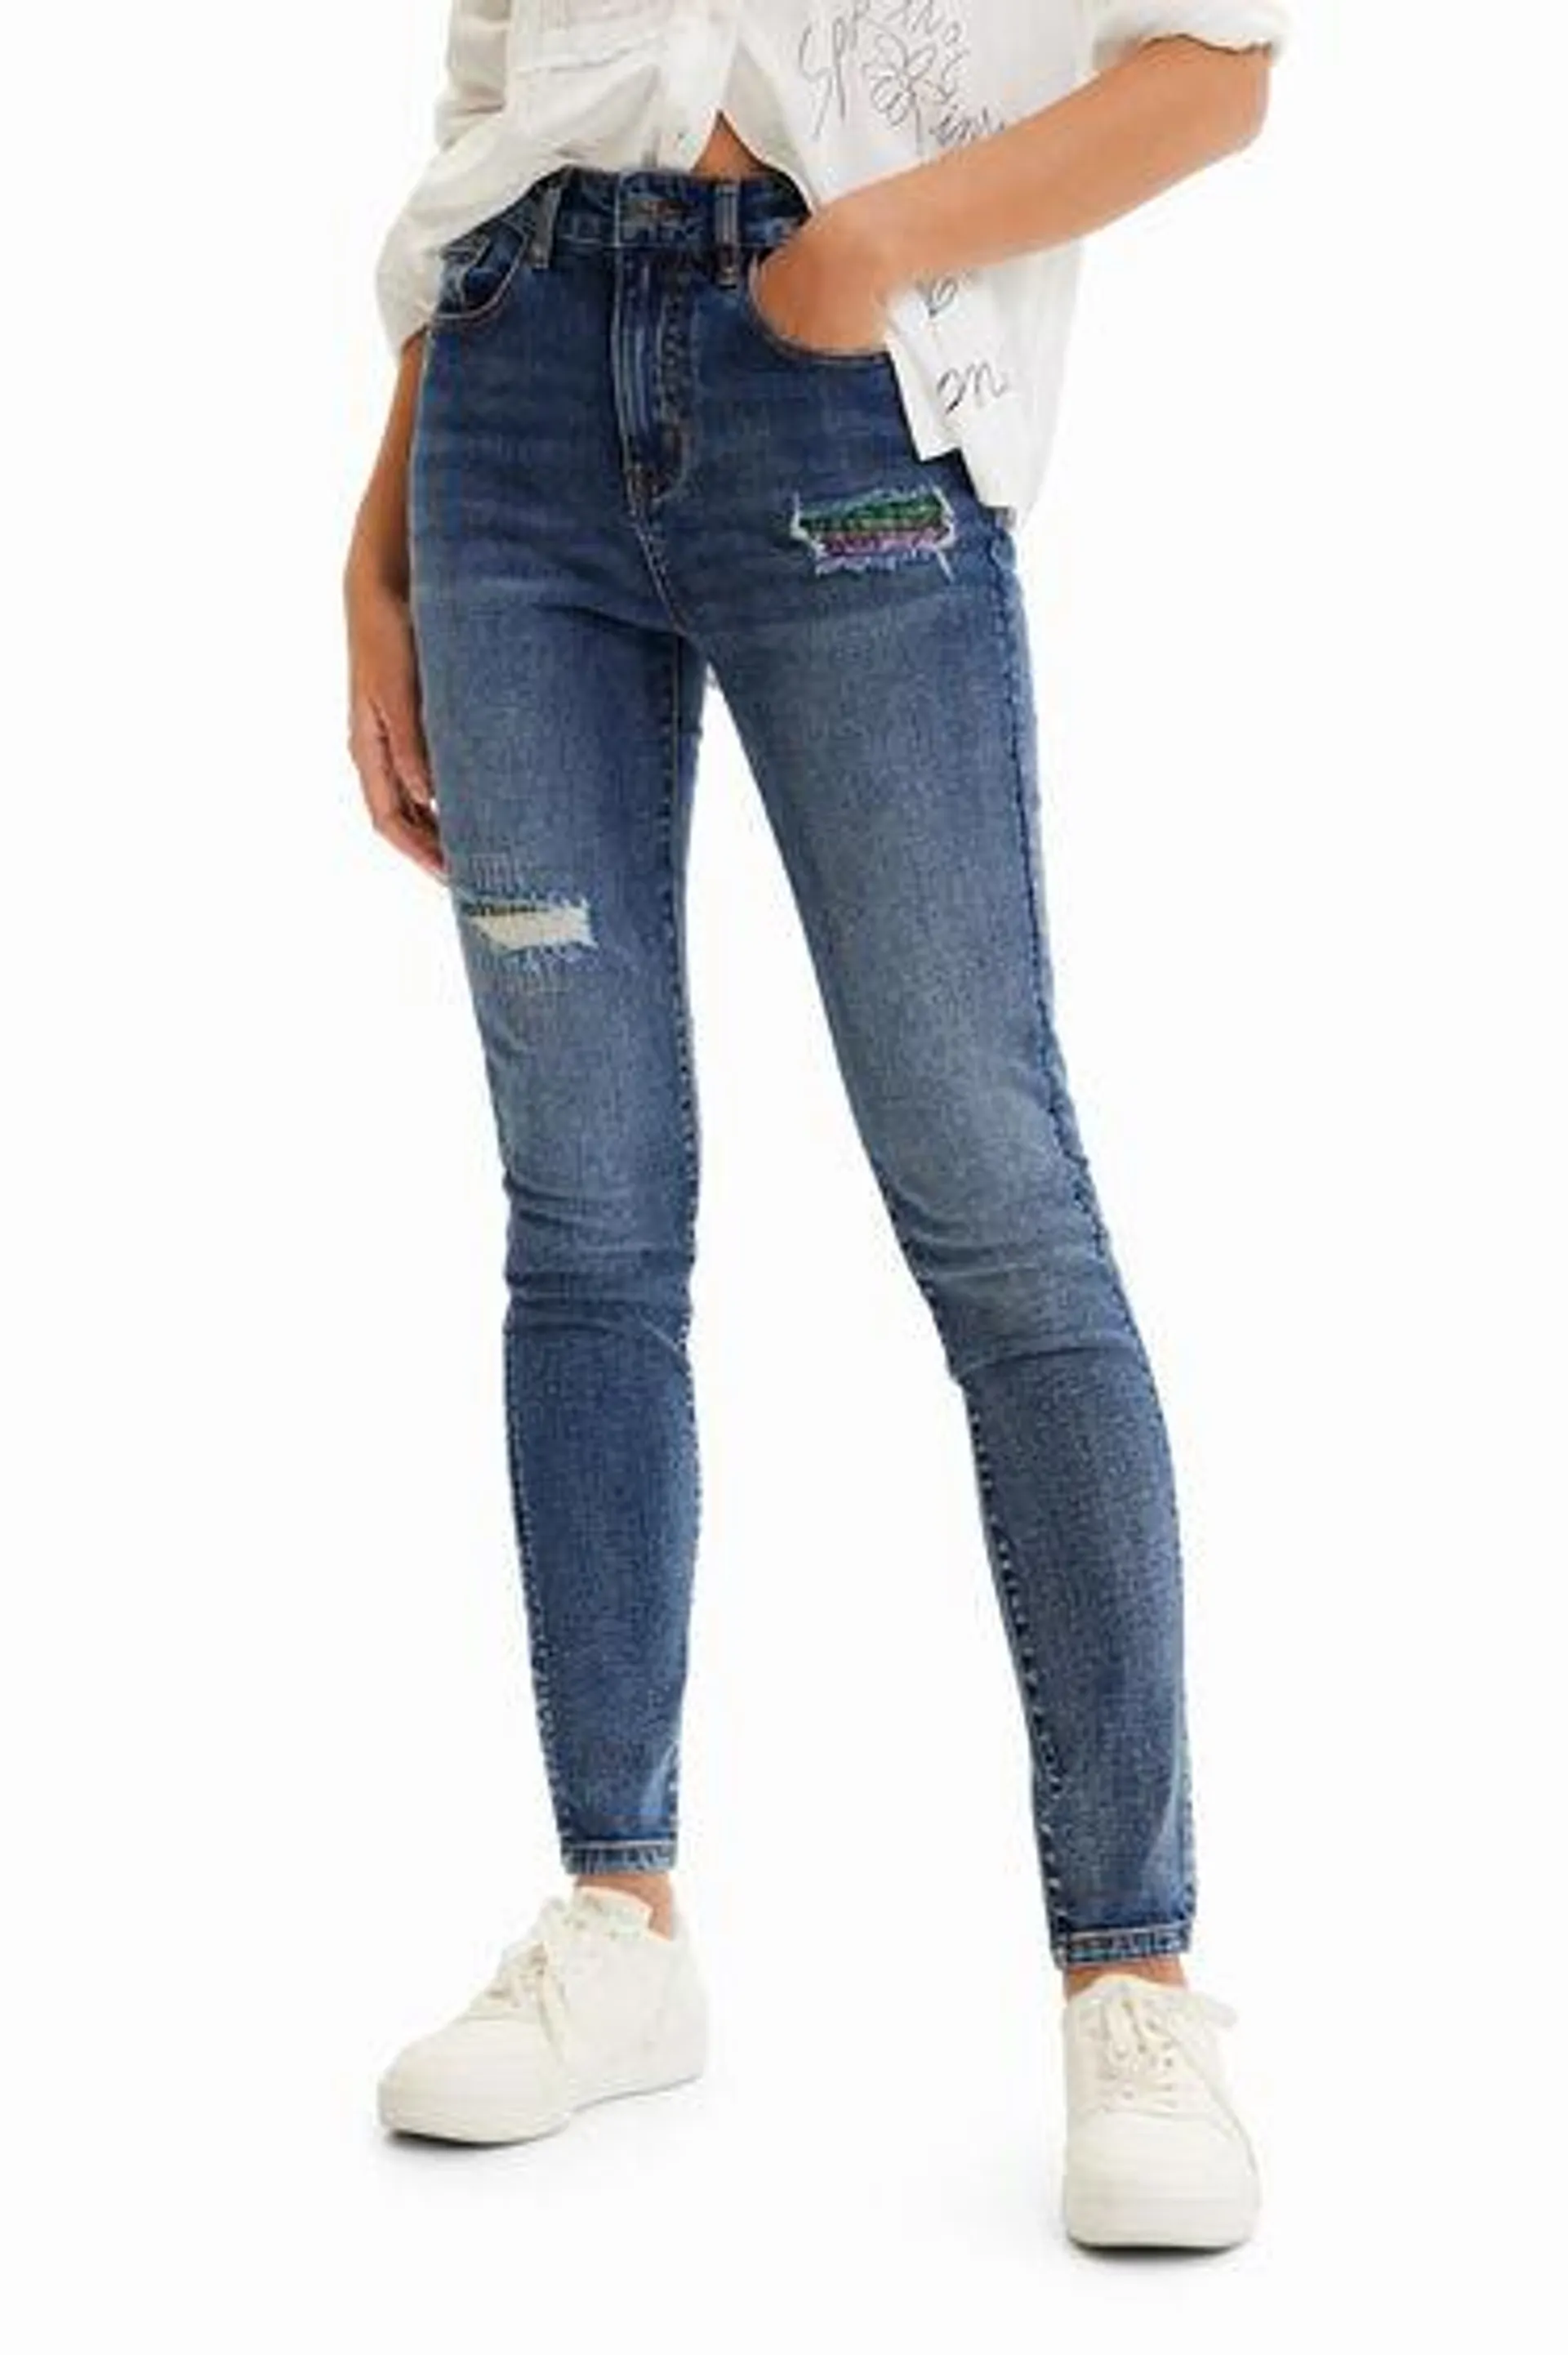 Ripped slim push-up jeans